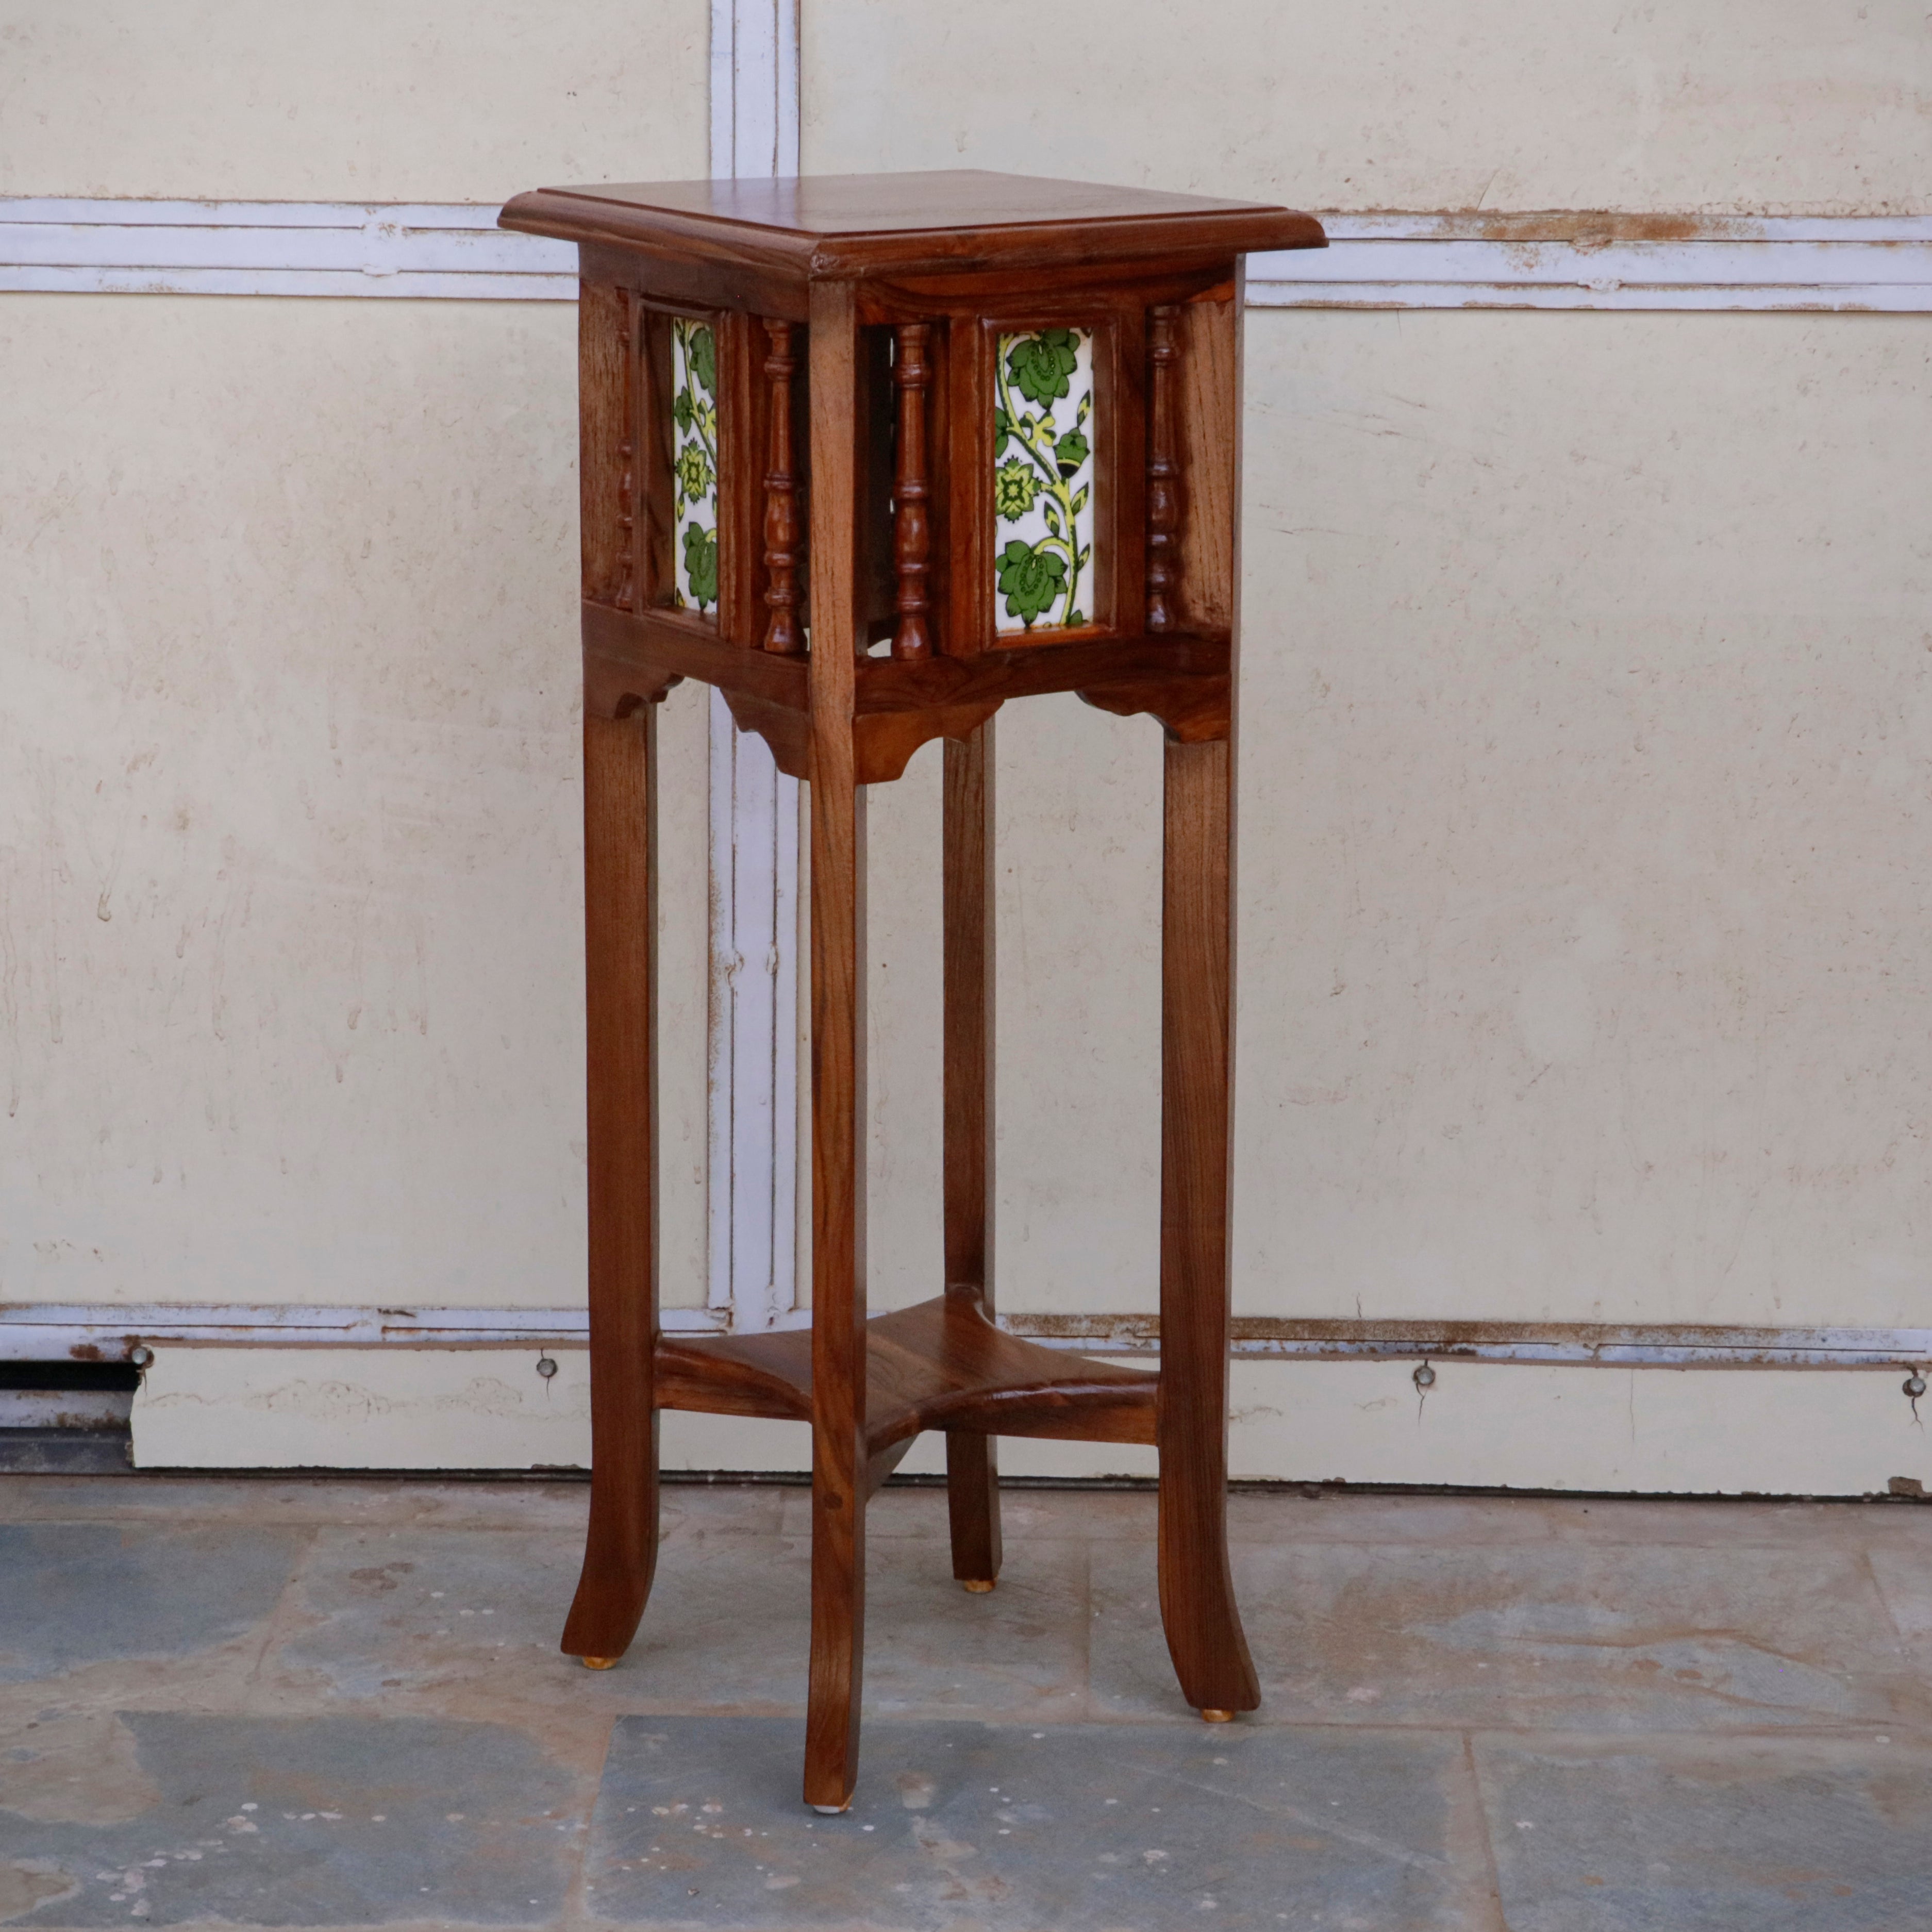 Classic Tiled End Table (11 x 11 x 30 Inch) End Table